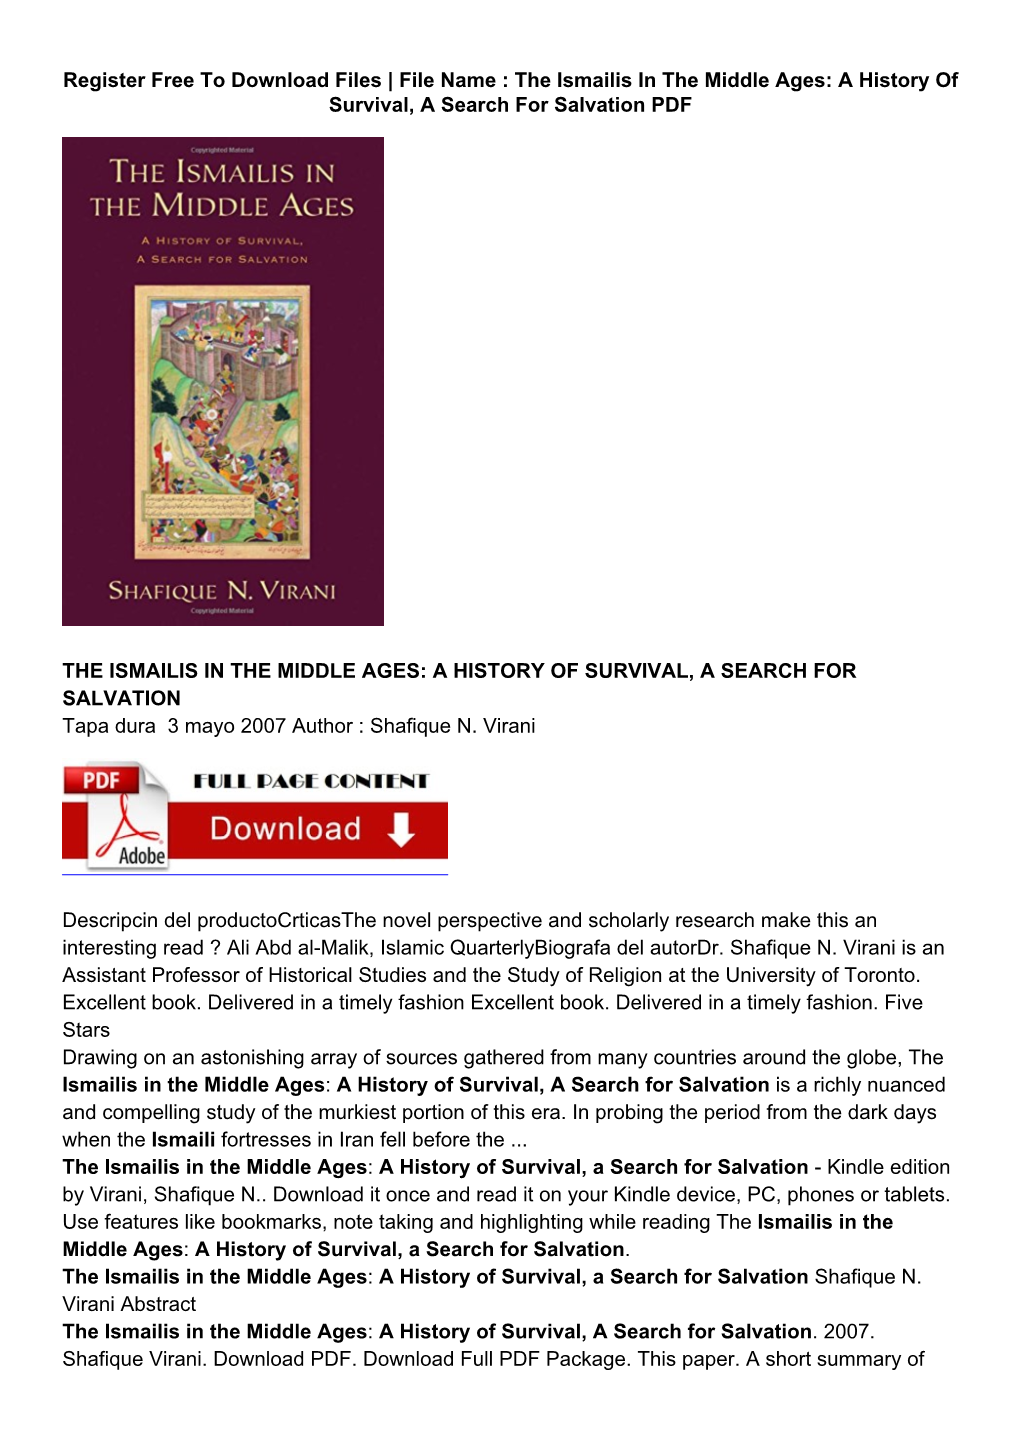 PDF Free the Ismailis in the Middle Ages: A